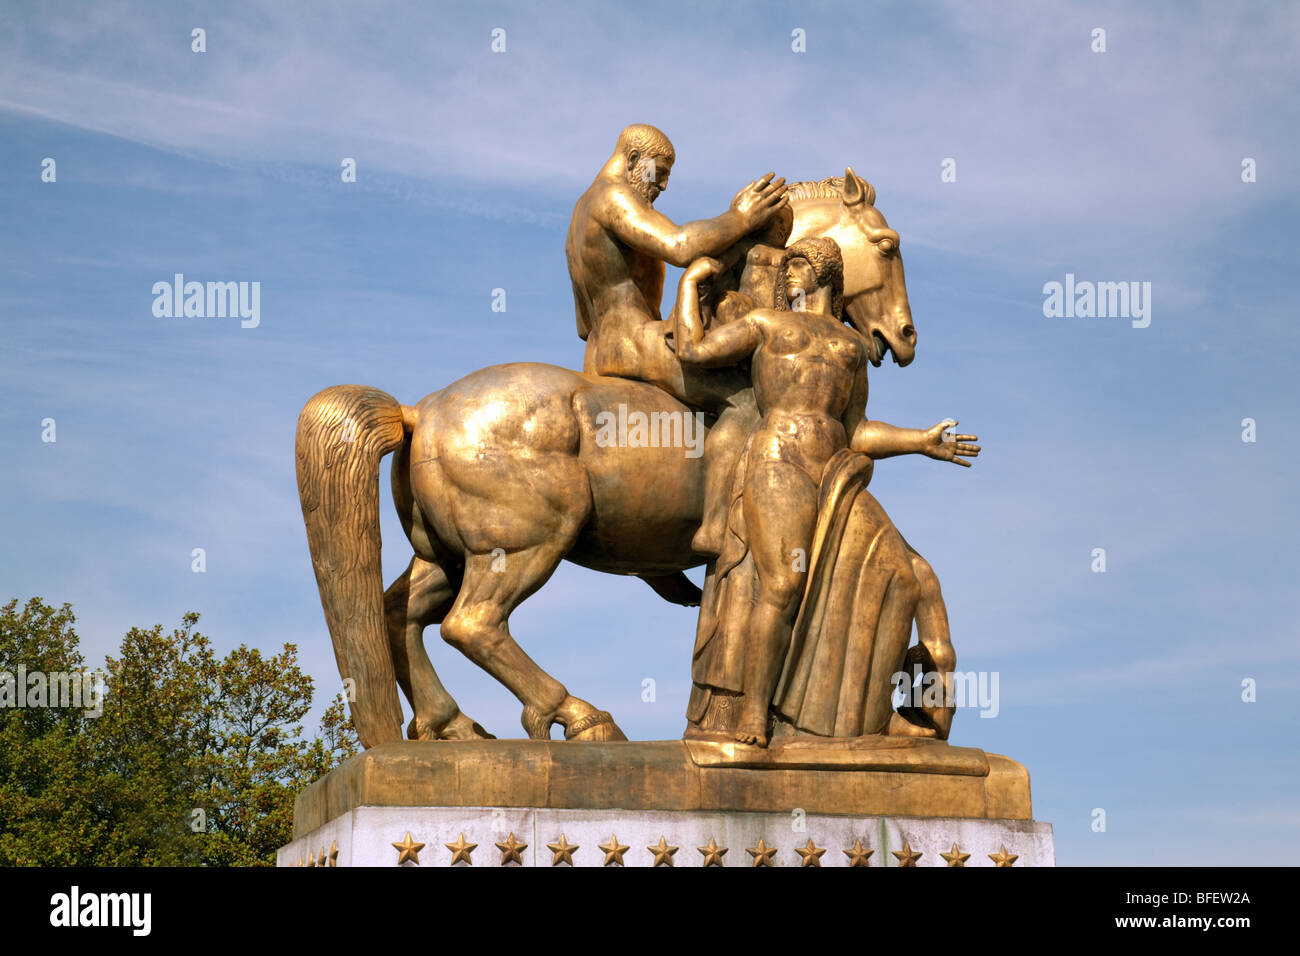 The Statue  'Sacrifice' - one of two equestrian statues at the eastern end of the Arlington Memorial Bridge Washington DC, USA Stock Photo